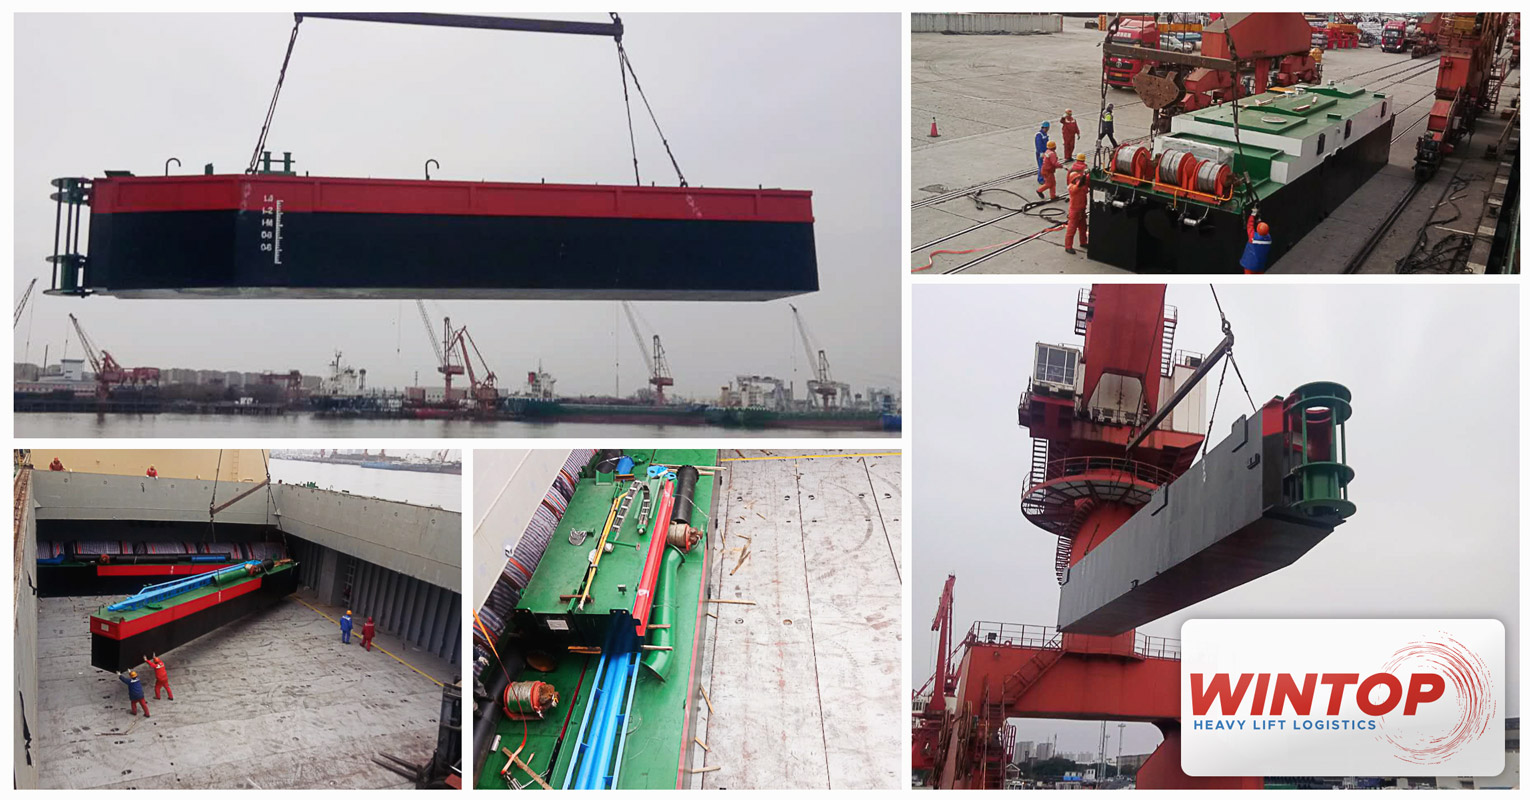 Shipment handled by Wintop Heavy Lift from Shanghai to Batam